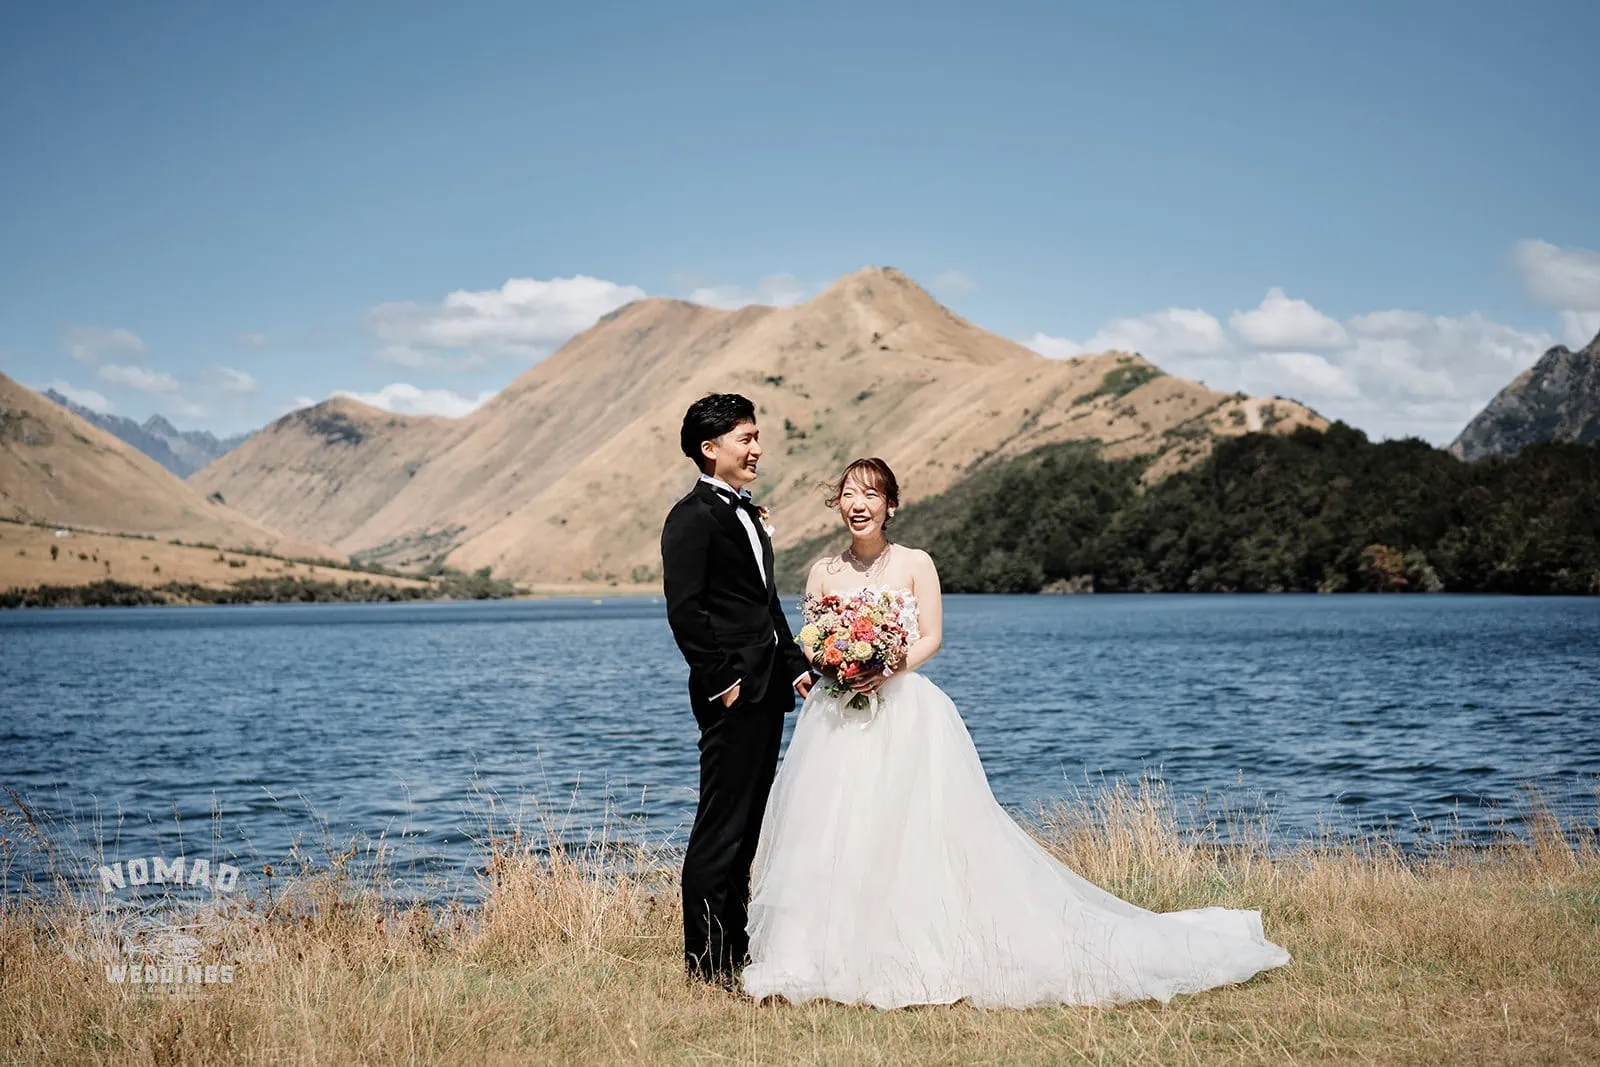 Queenstown New Zealand Elopement Wedding Photographer - A bride and groom standing in front of a lake during the summer season in Queenstown.